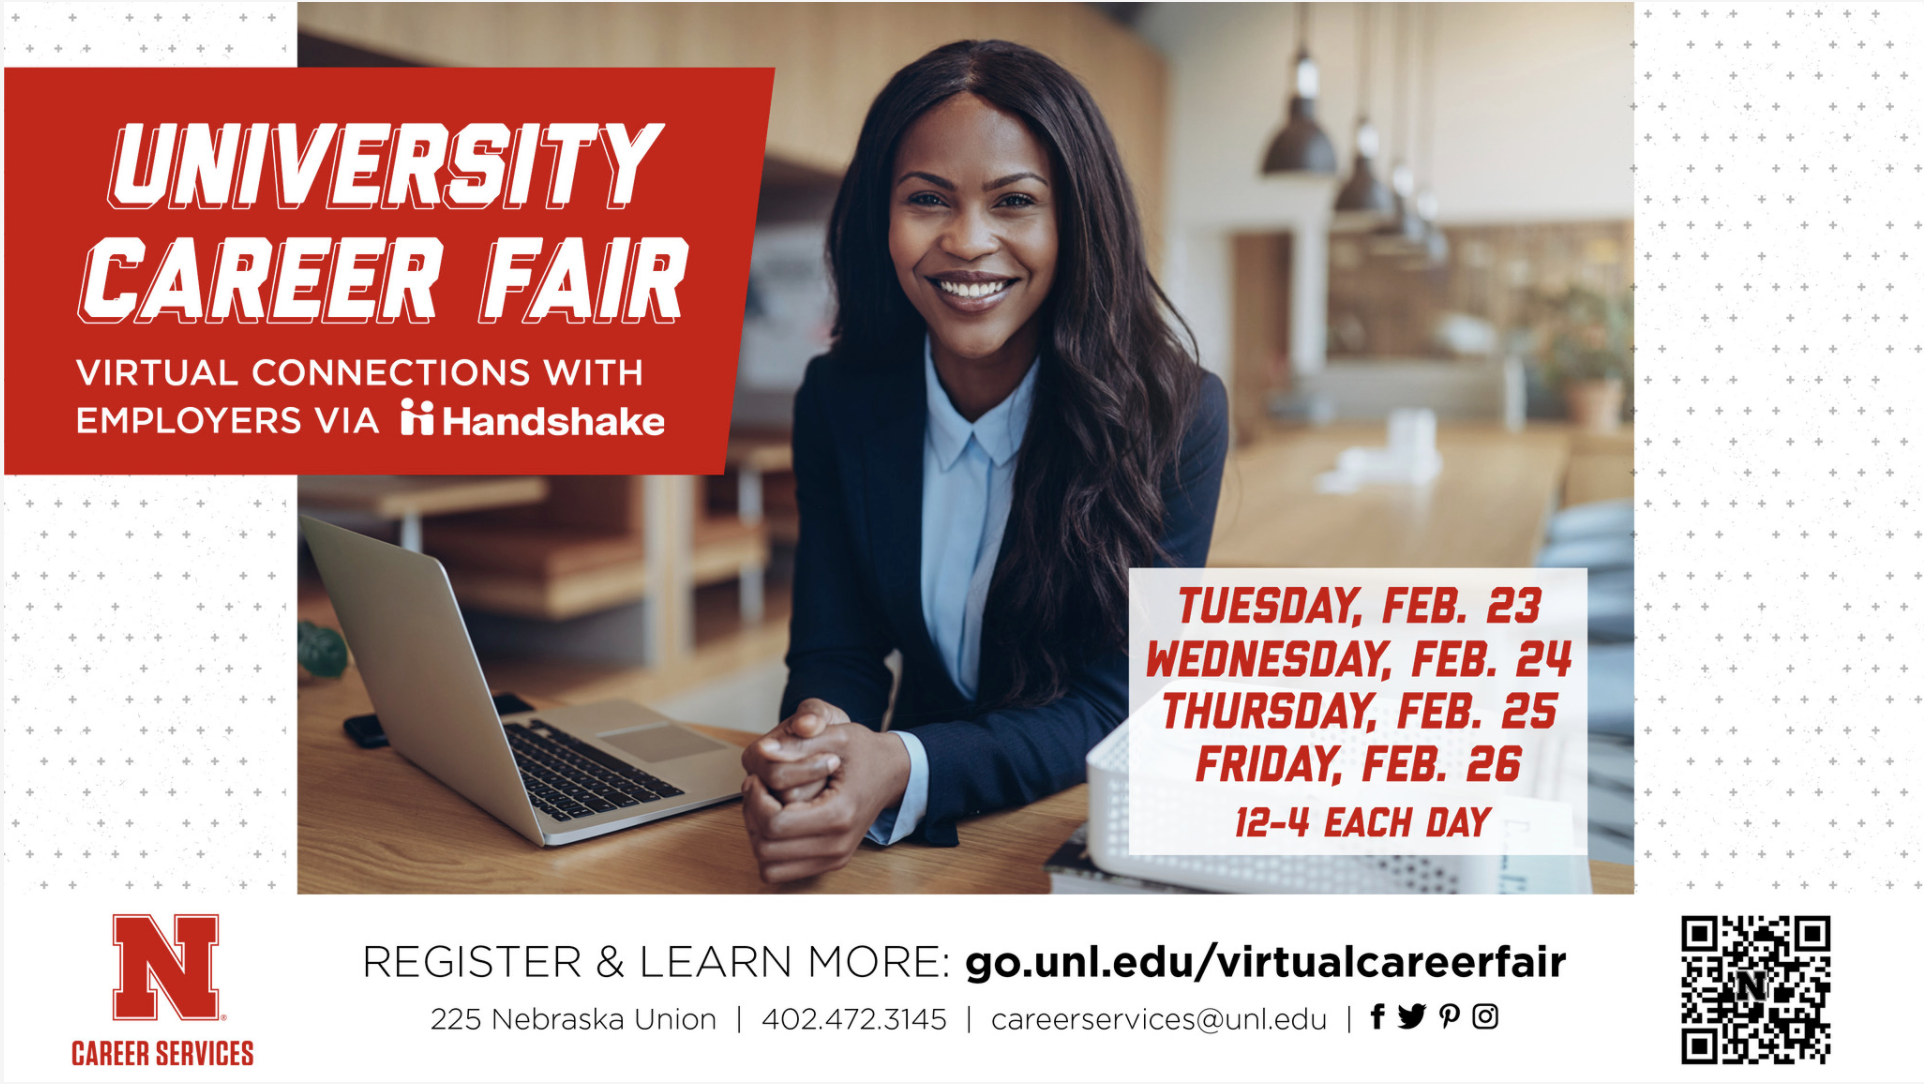 Students, alumni, and employers can all access the Virtual Career Fairs through Handshake. This virtual platform enables students and employers to connect via video, chat, or both.